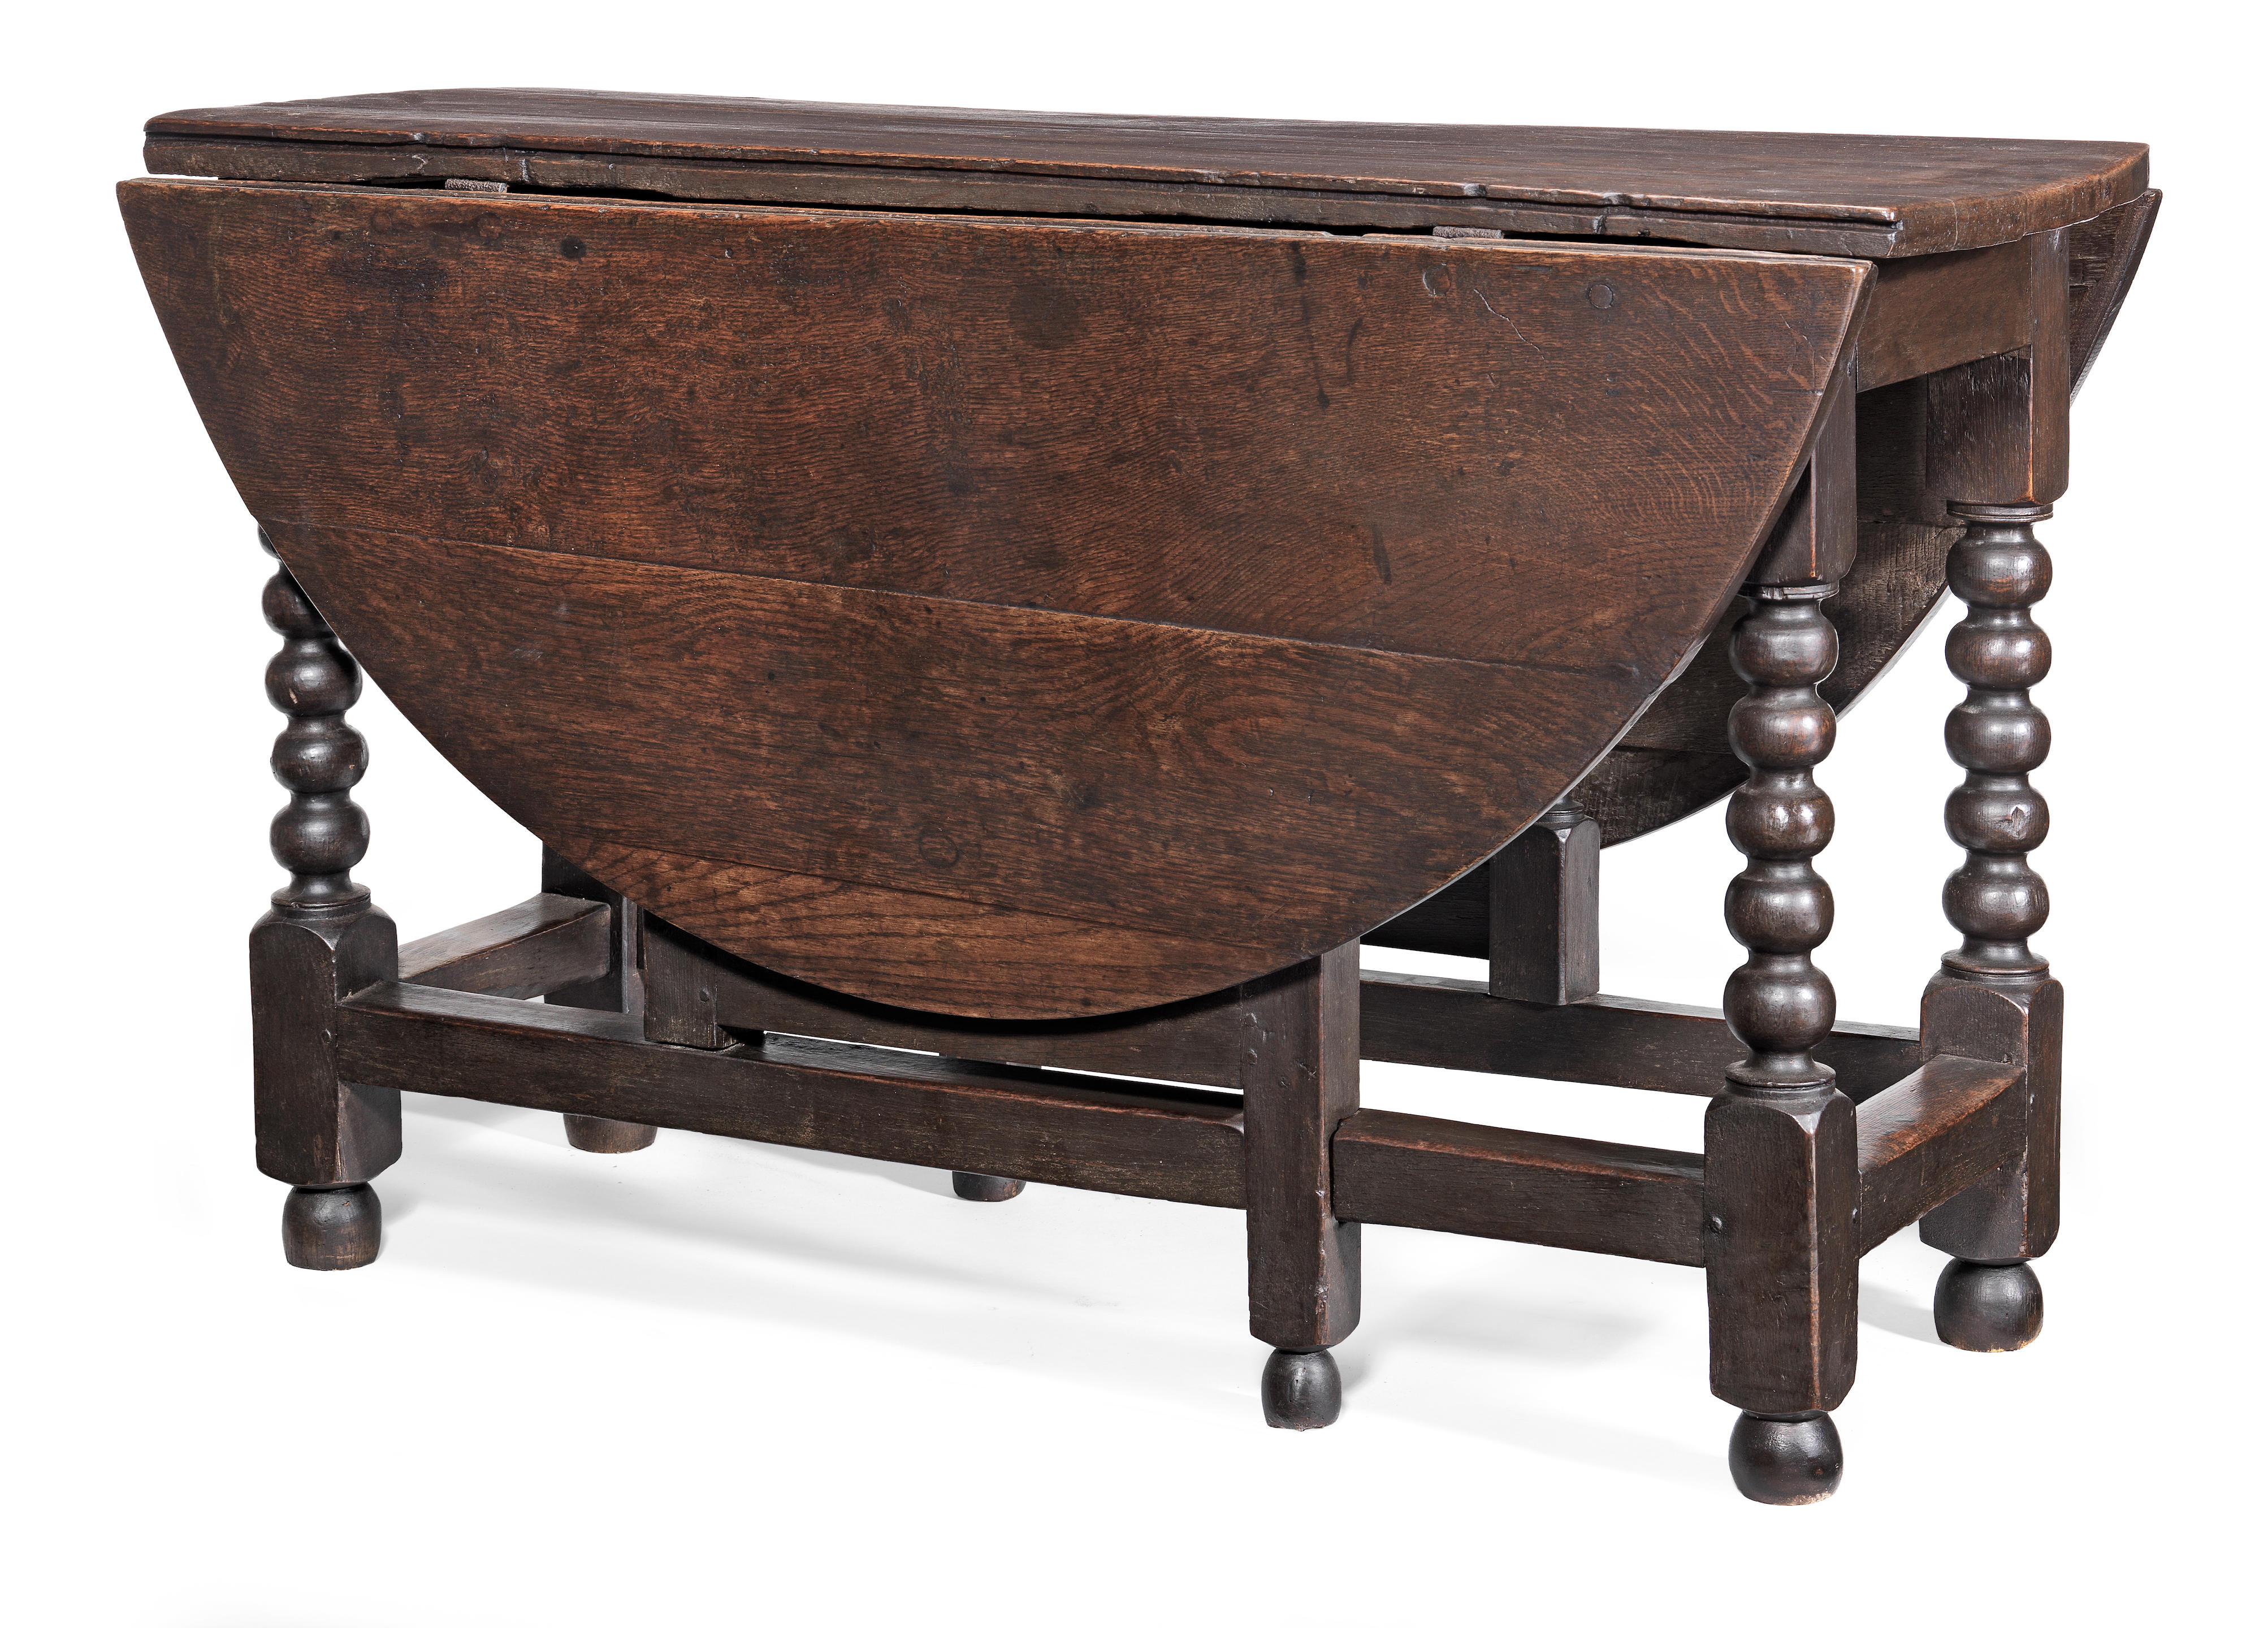 A Charles II joined oak gateleg dining table, circa 1680